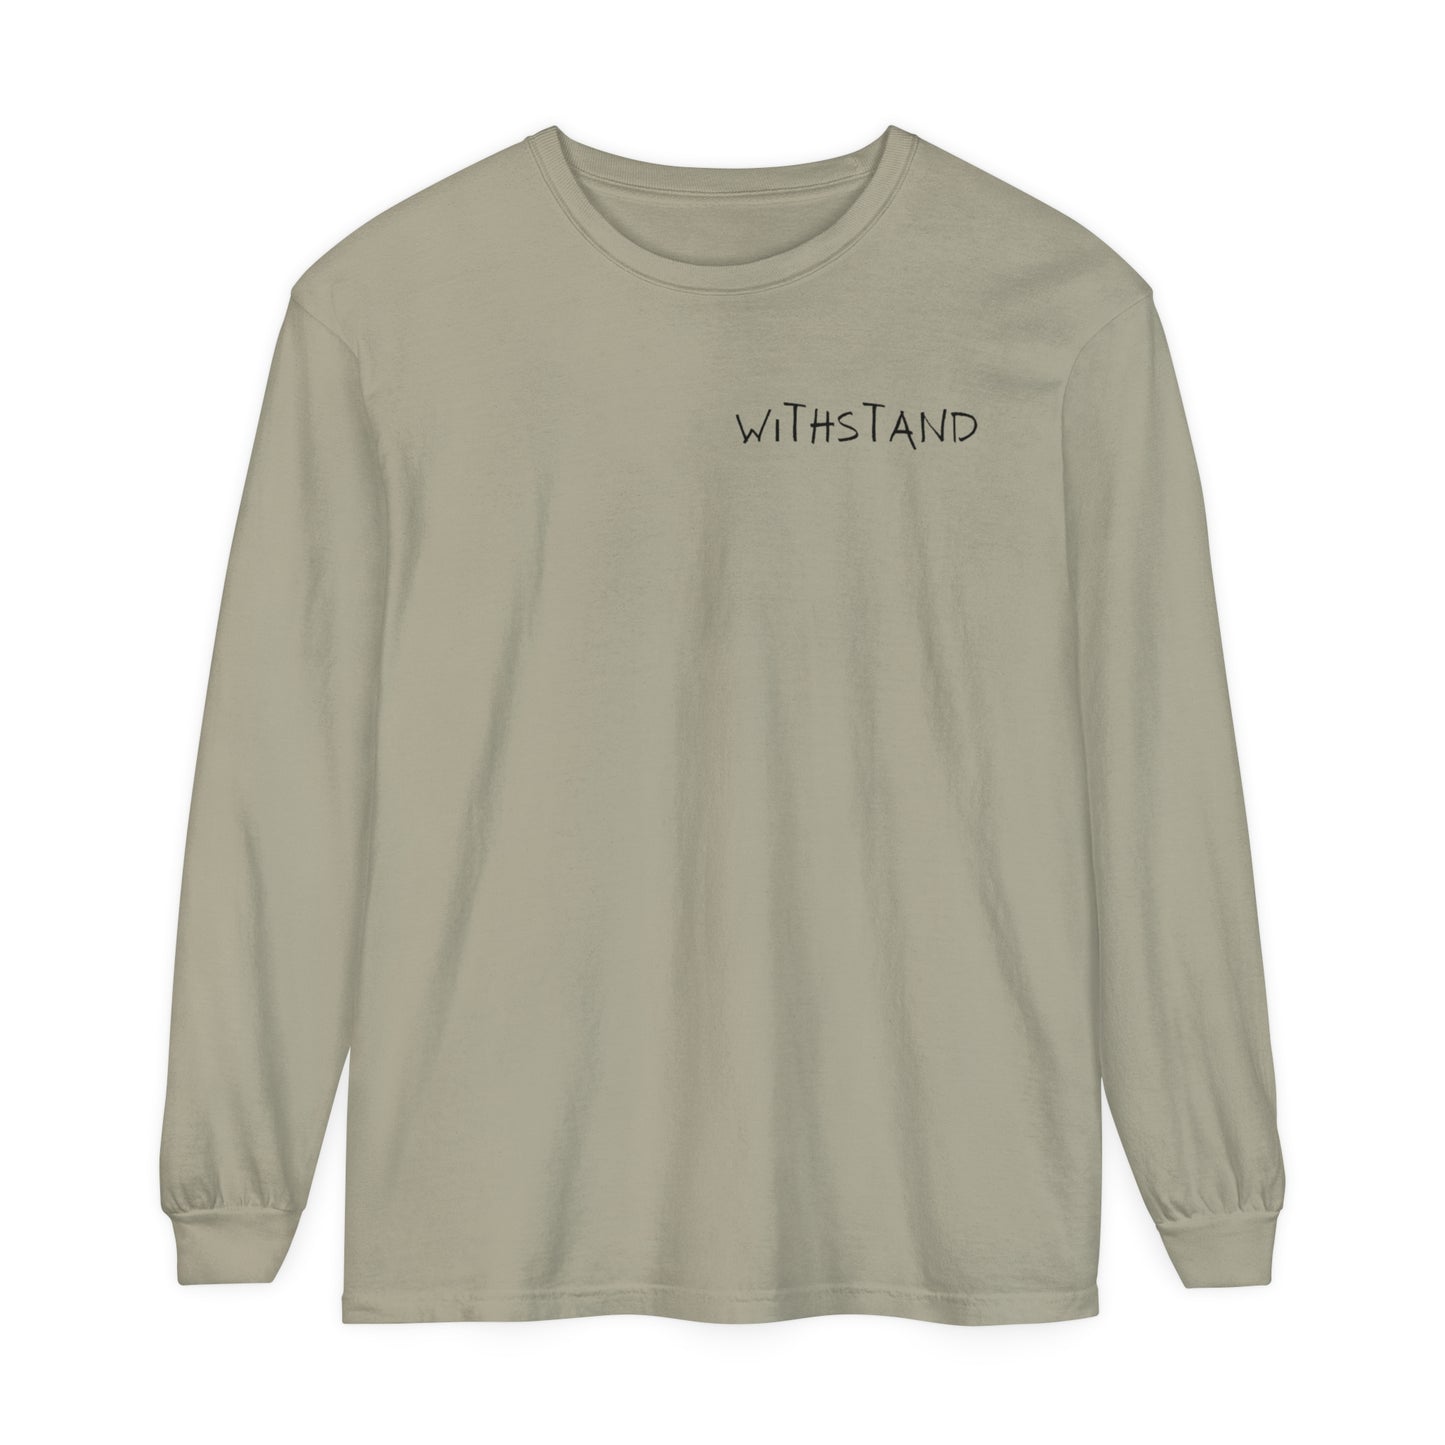 Withstand Long Sleeve T-Shirt